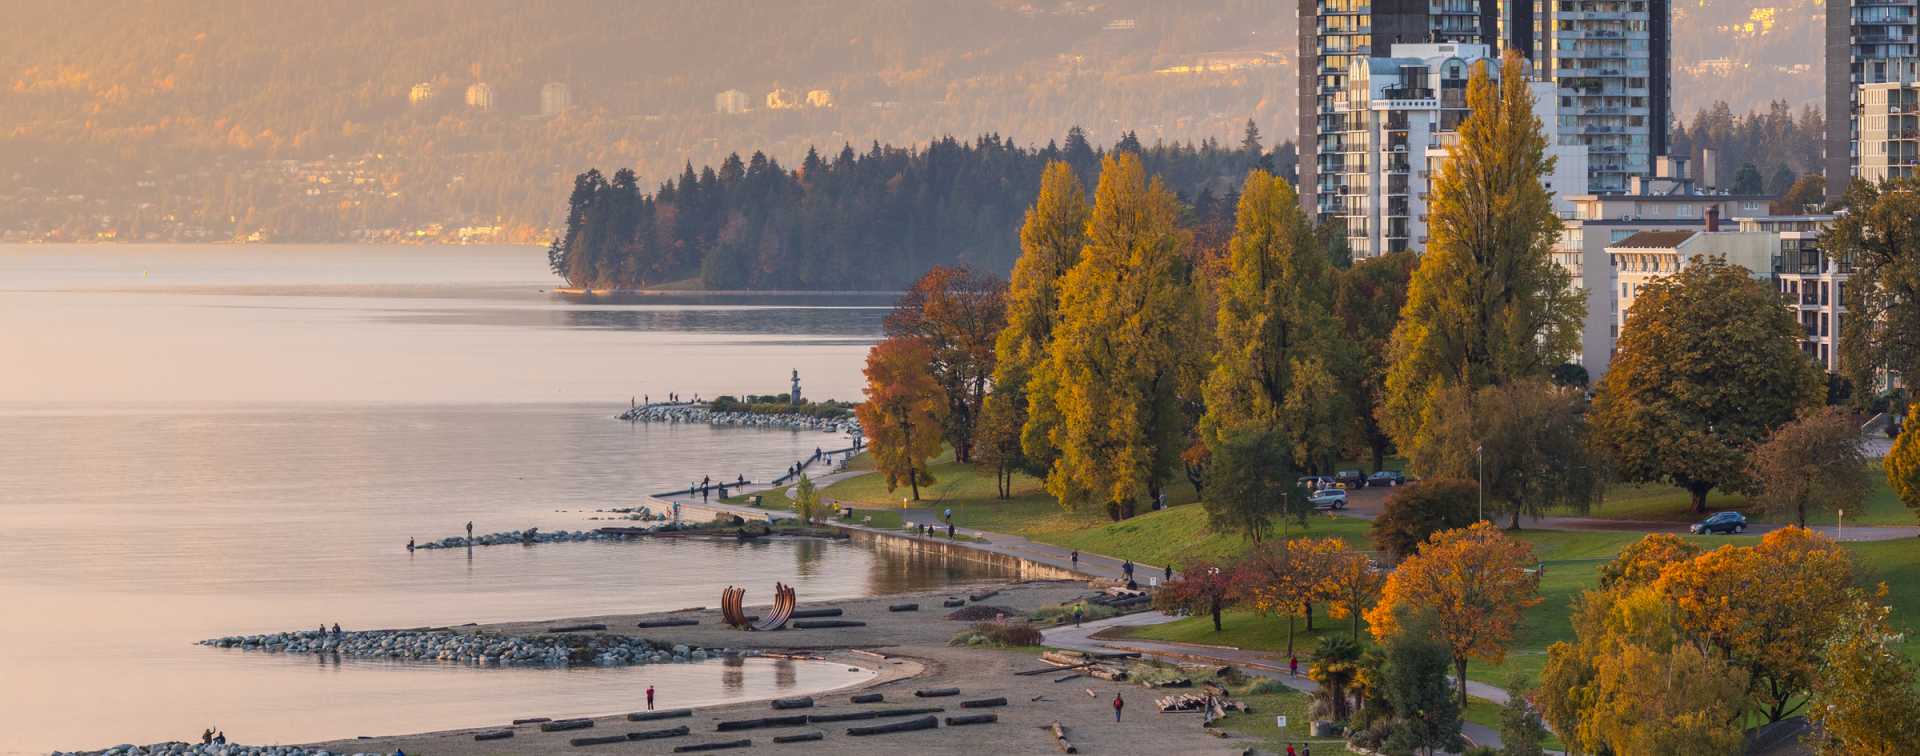 Fall in Vancouver Sunset Beach